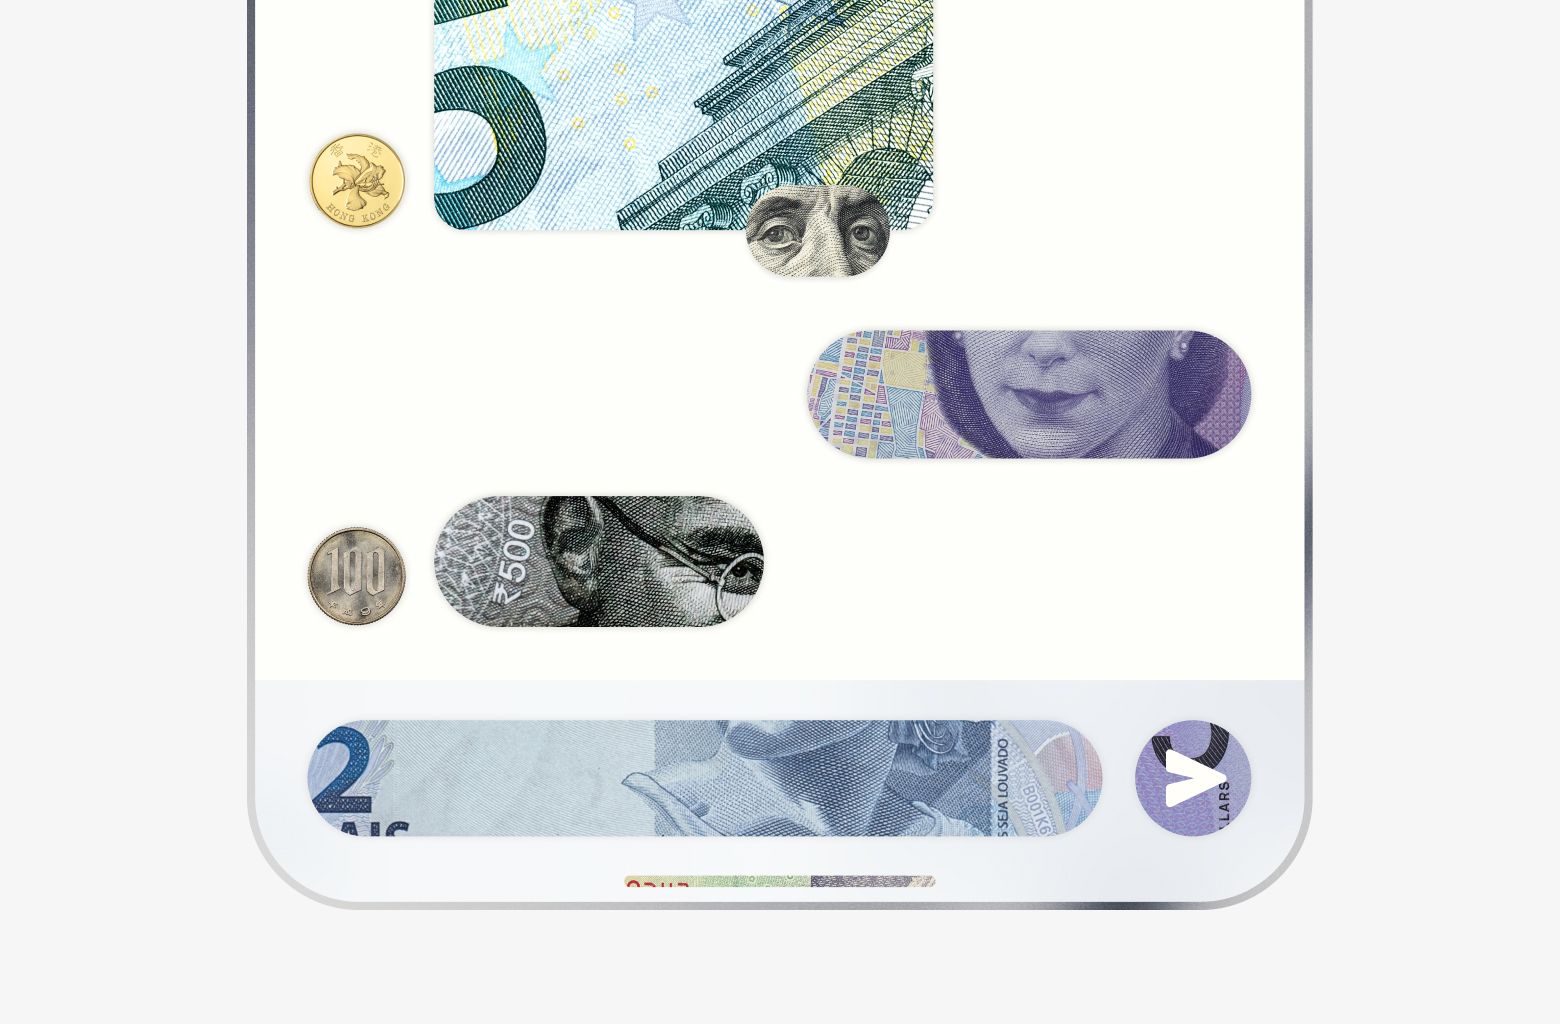 An illustration of a phone screen displaying the Signal interface. Every interface element is represented by photos of currencies from around the world.